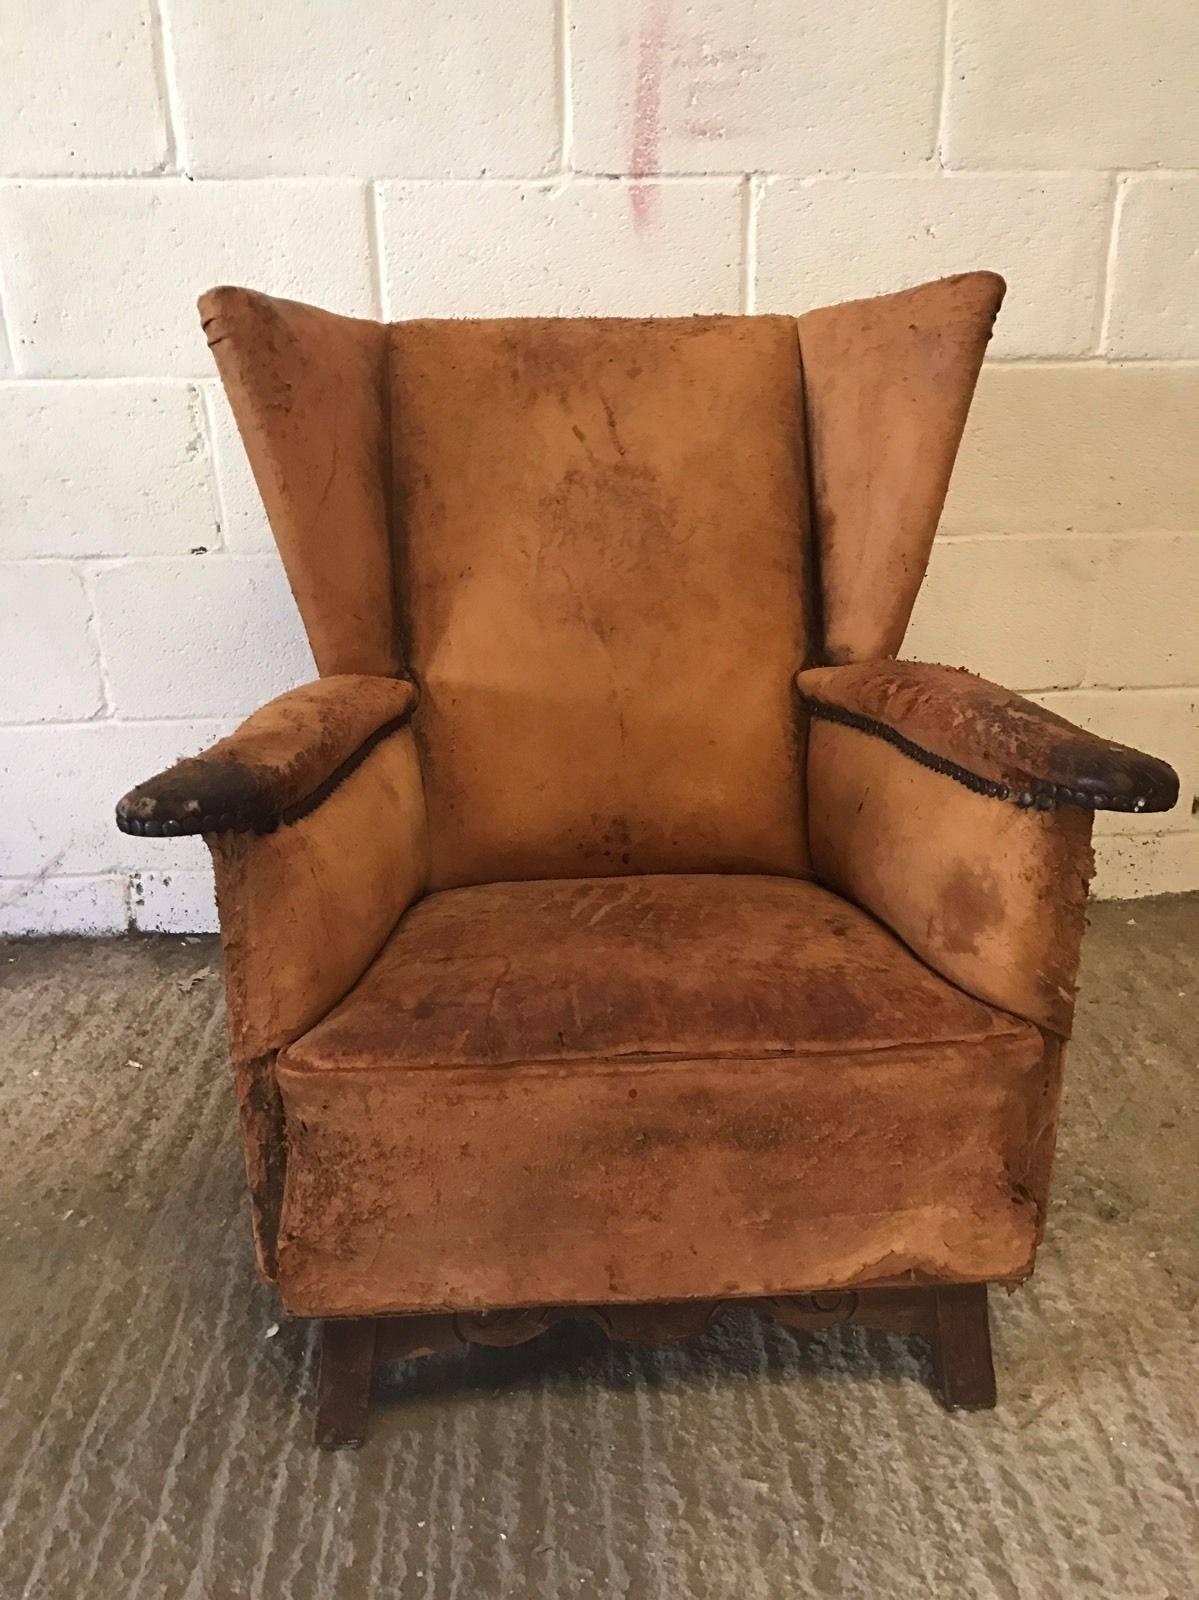 Beautiful and original French leather club chair. Distressed and aged, stood the test of time.

Structurally sound, leather is very distressed. Very unusual shape, not seen many like this before.

 